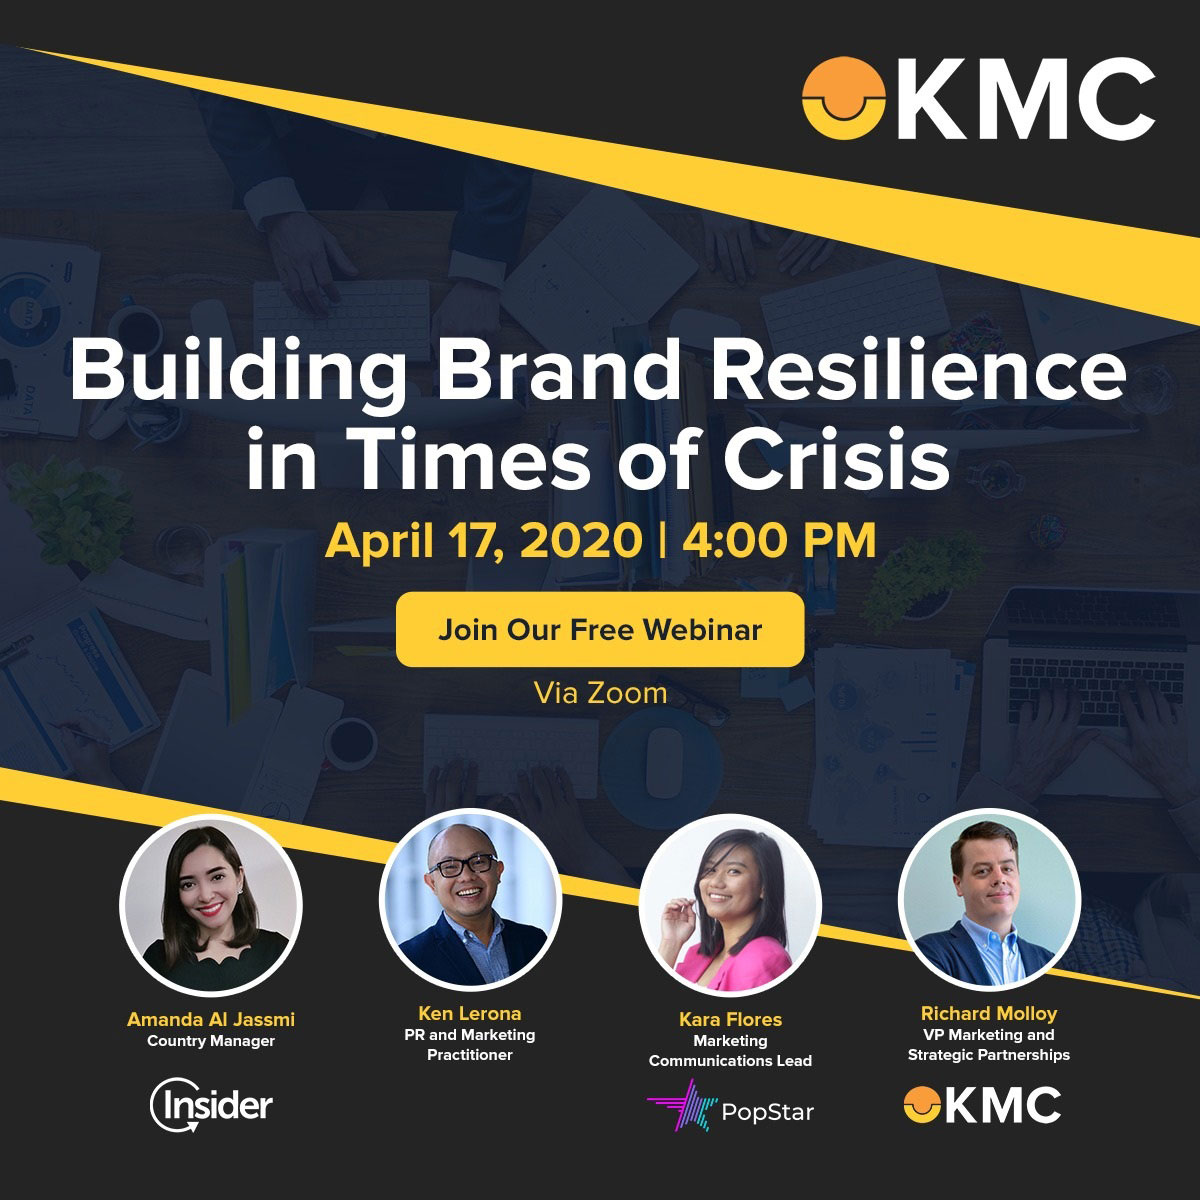 Building Brand Resilience in Times of Crisis